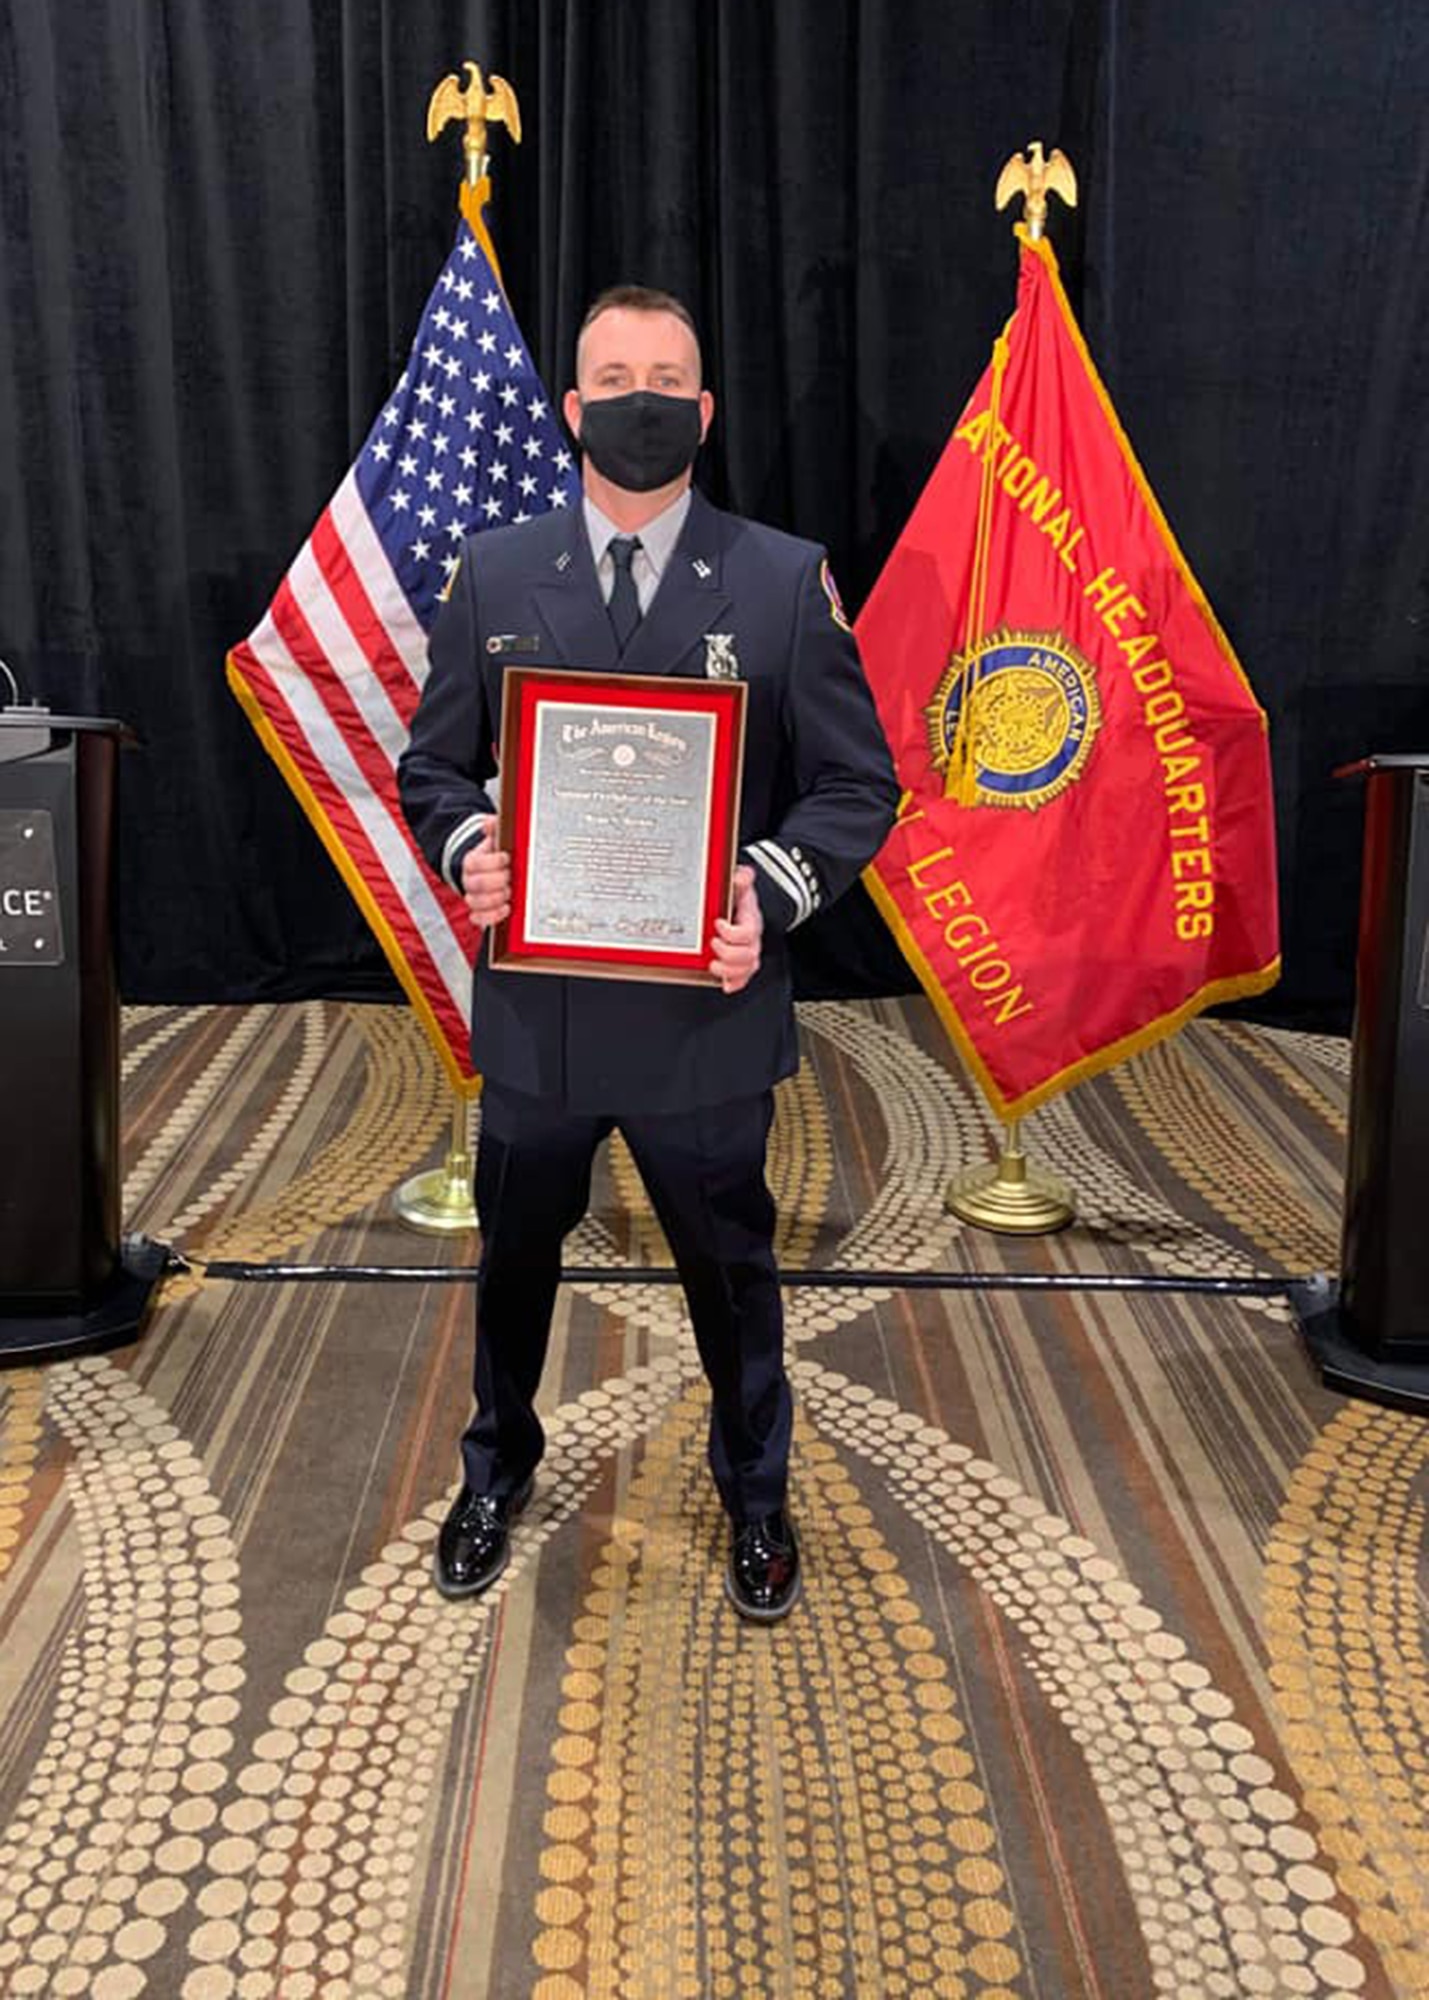 Firefighter poses with an award